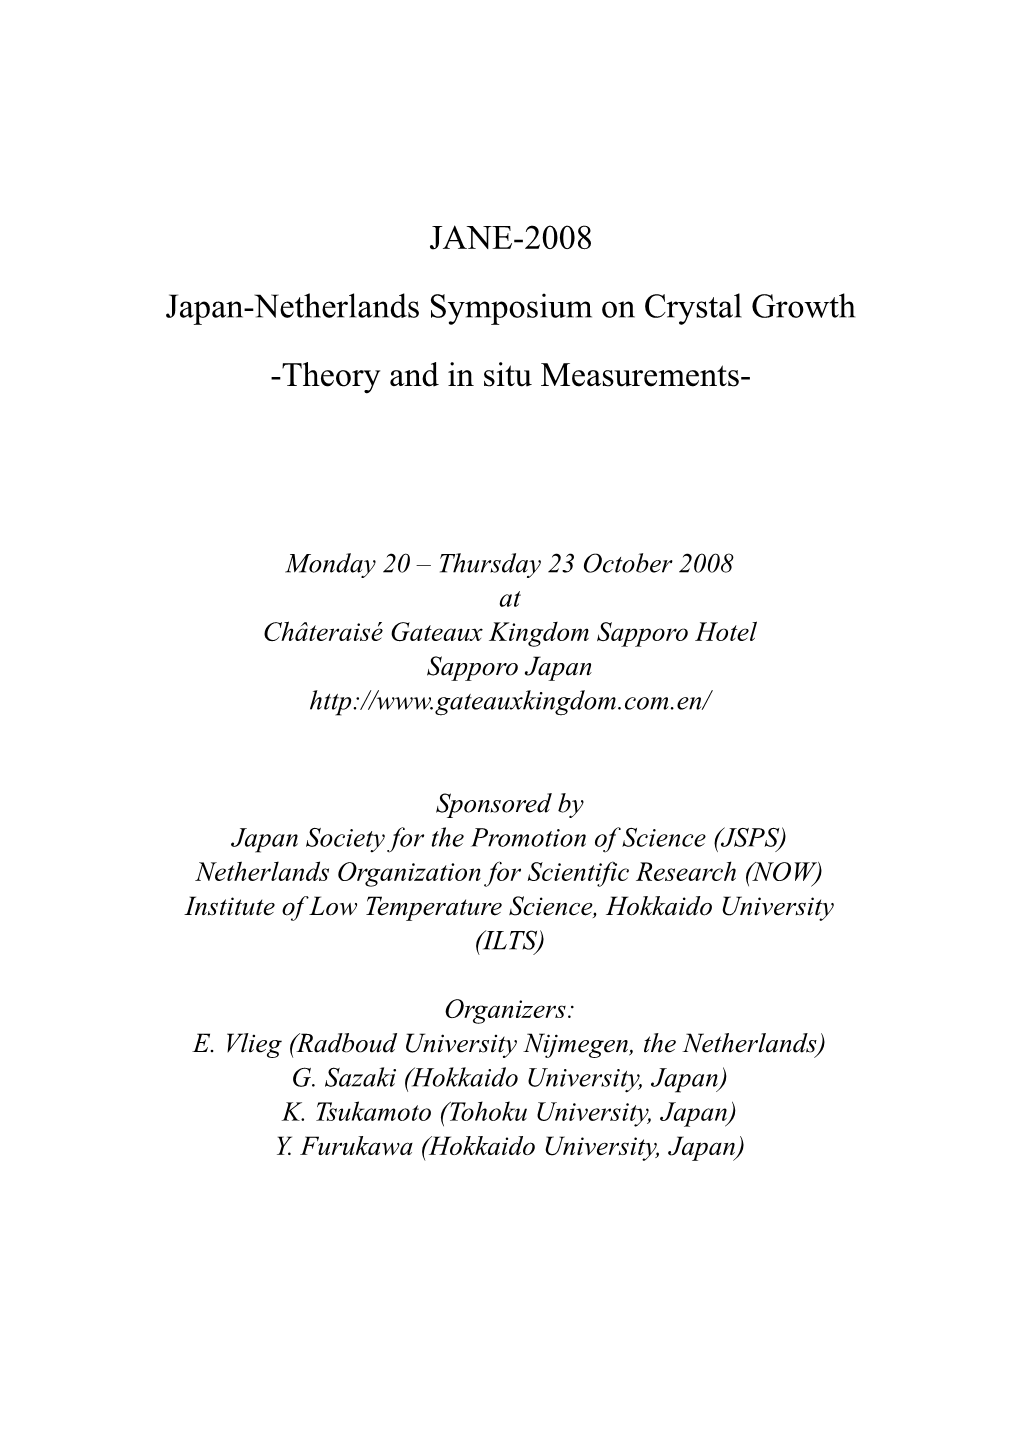 Japan-Netherlands Symposium on Crystal Growth -Theory and in Situ Measurements